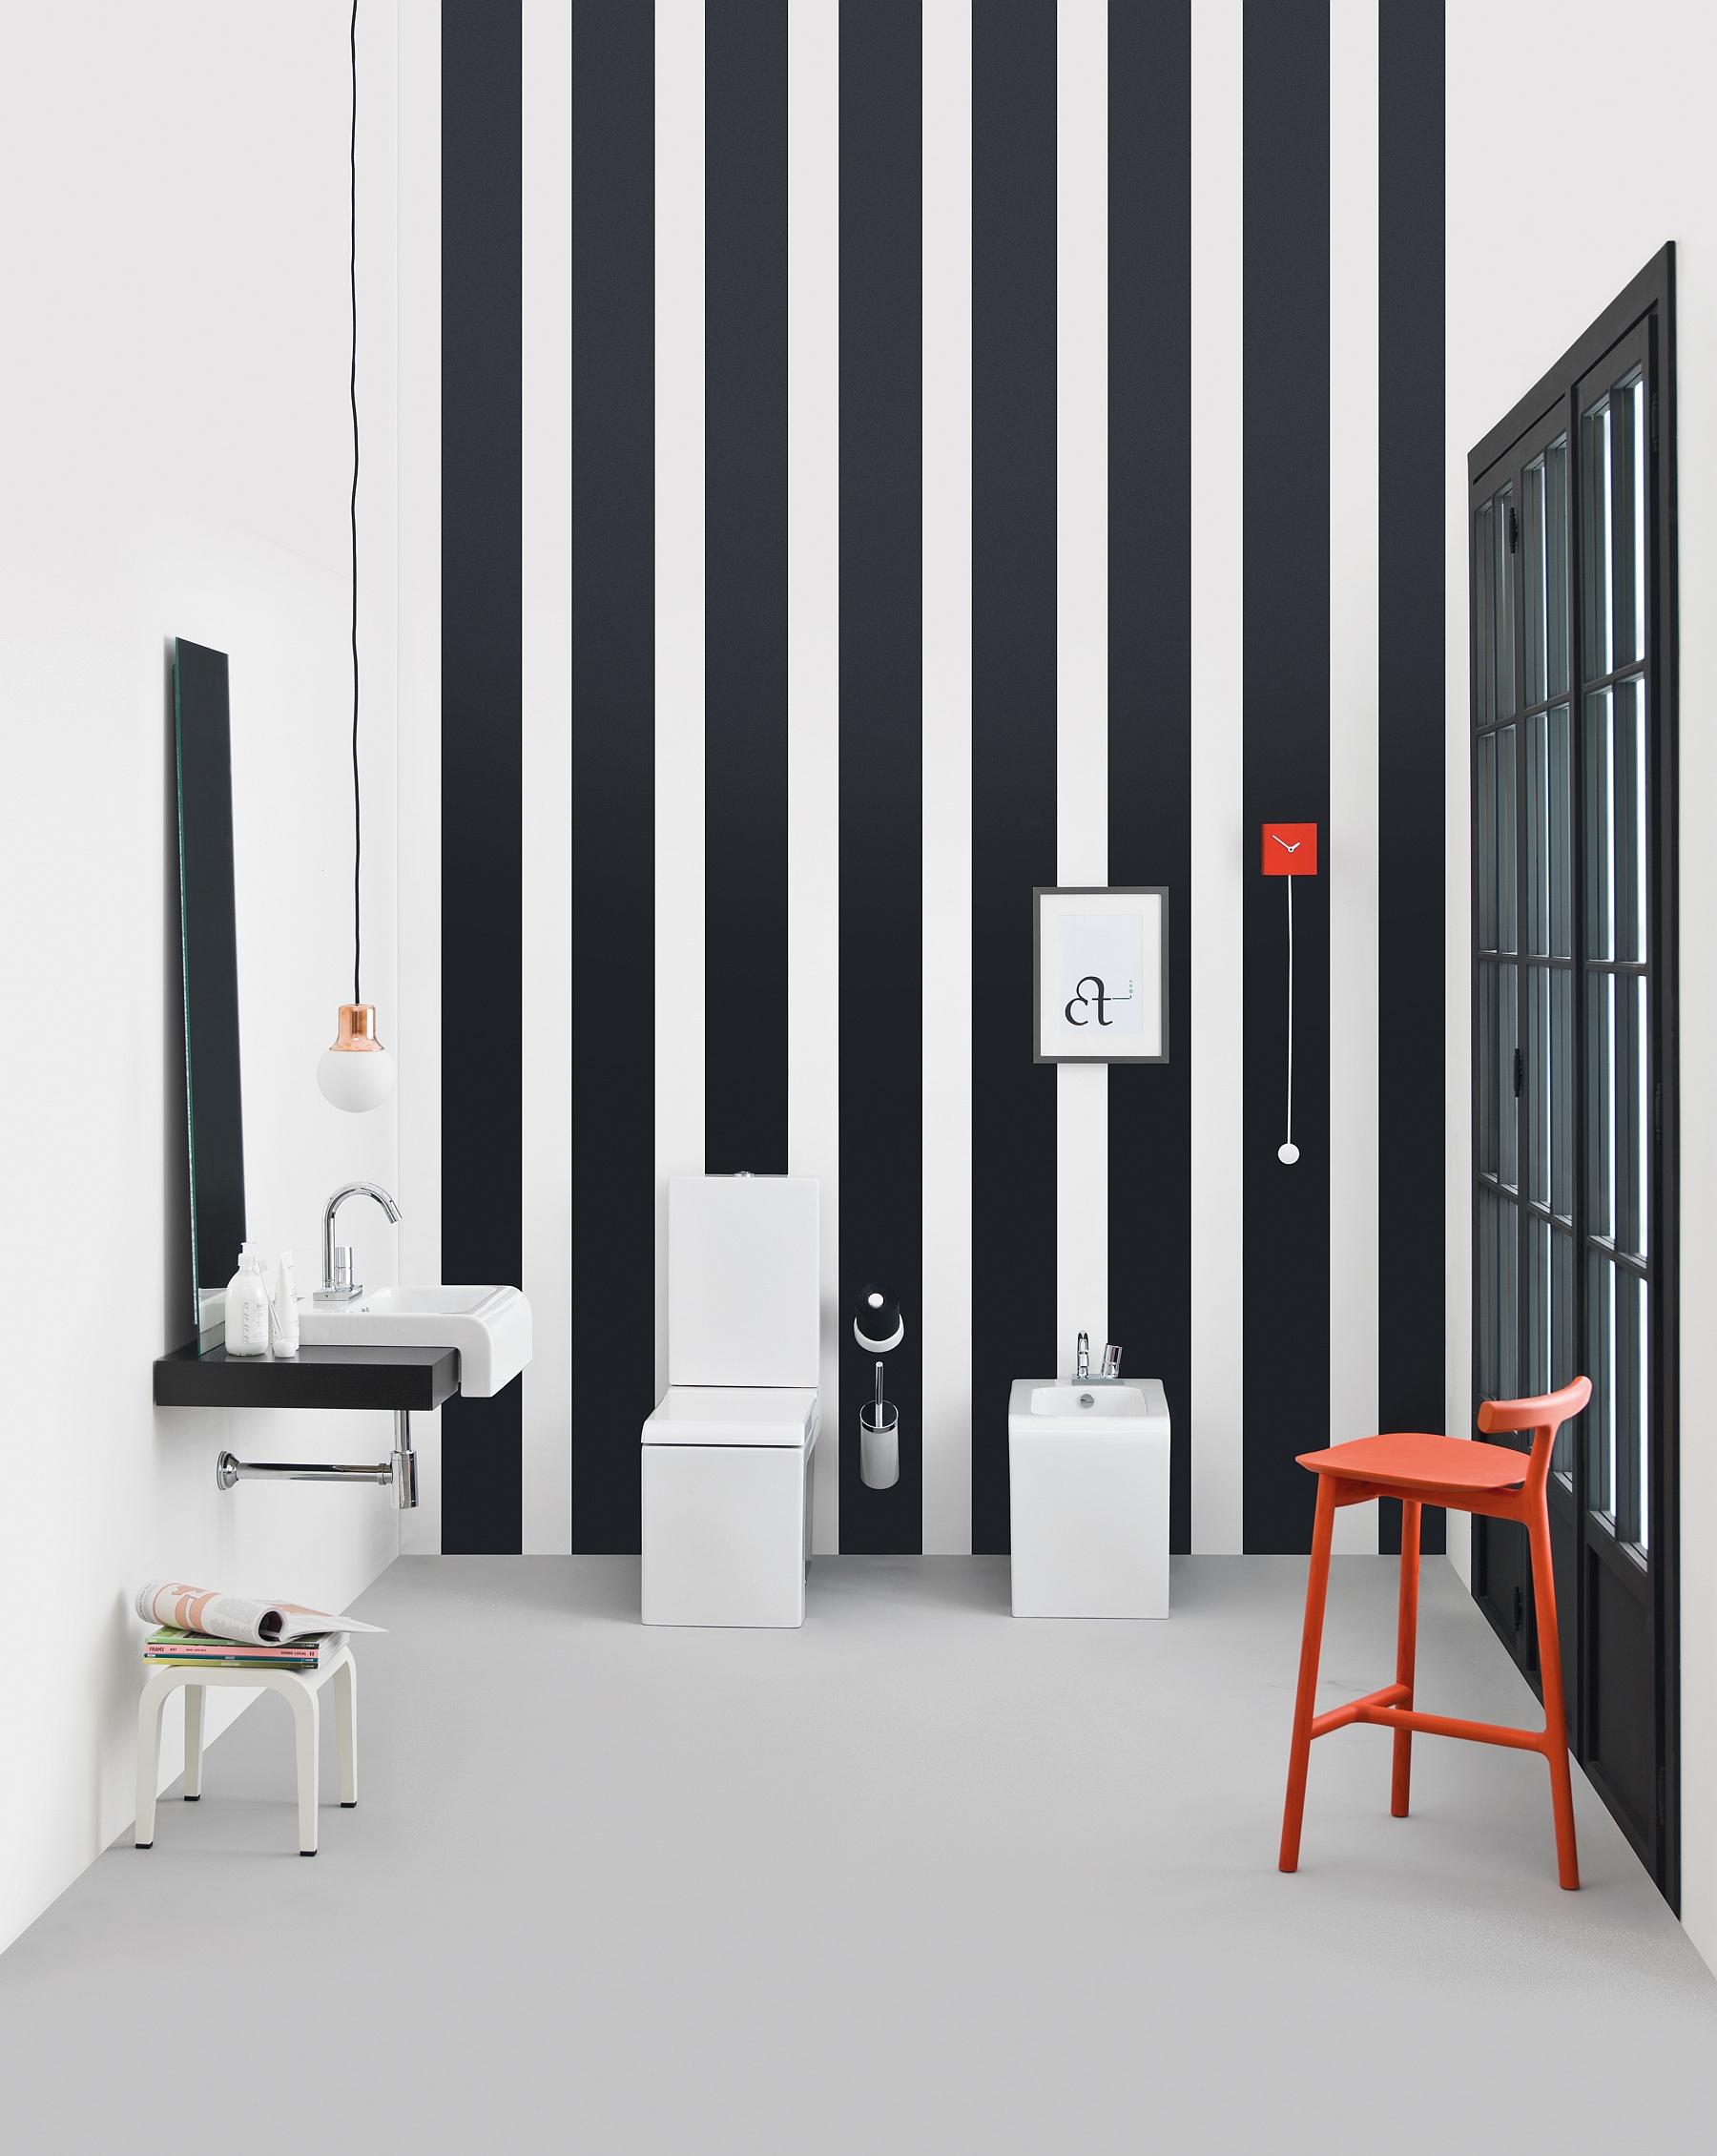 Vertical stripes, sleek sanitaries and pops of red in the blacka dn white bath inspiration